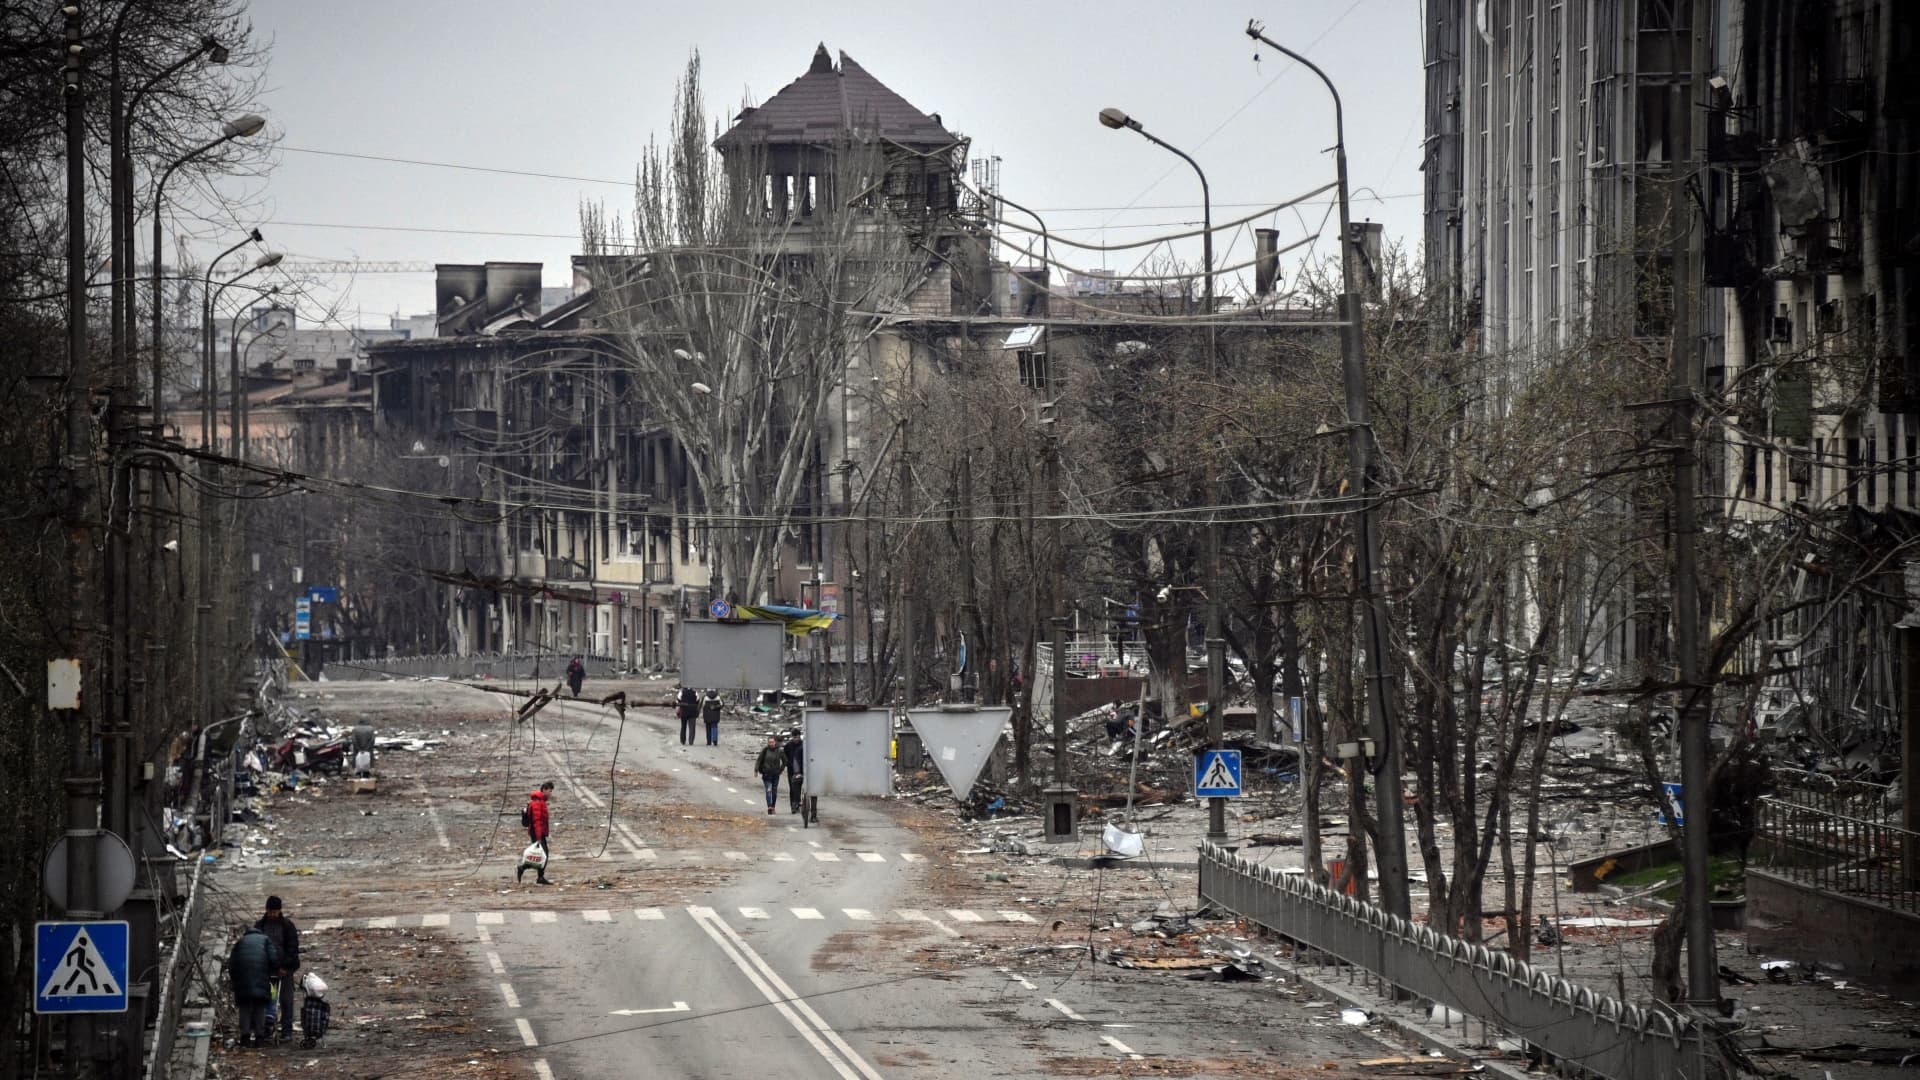 An avenue in Mariupol on April 12, 2022. The besieged Ukrainian city could now be facing a deadly cholera outbreak, NBC News cited local officials.